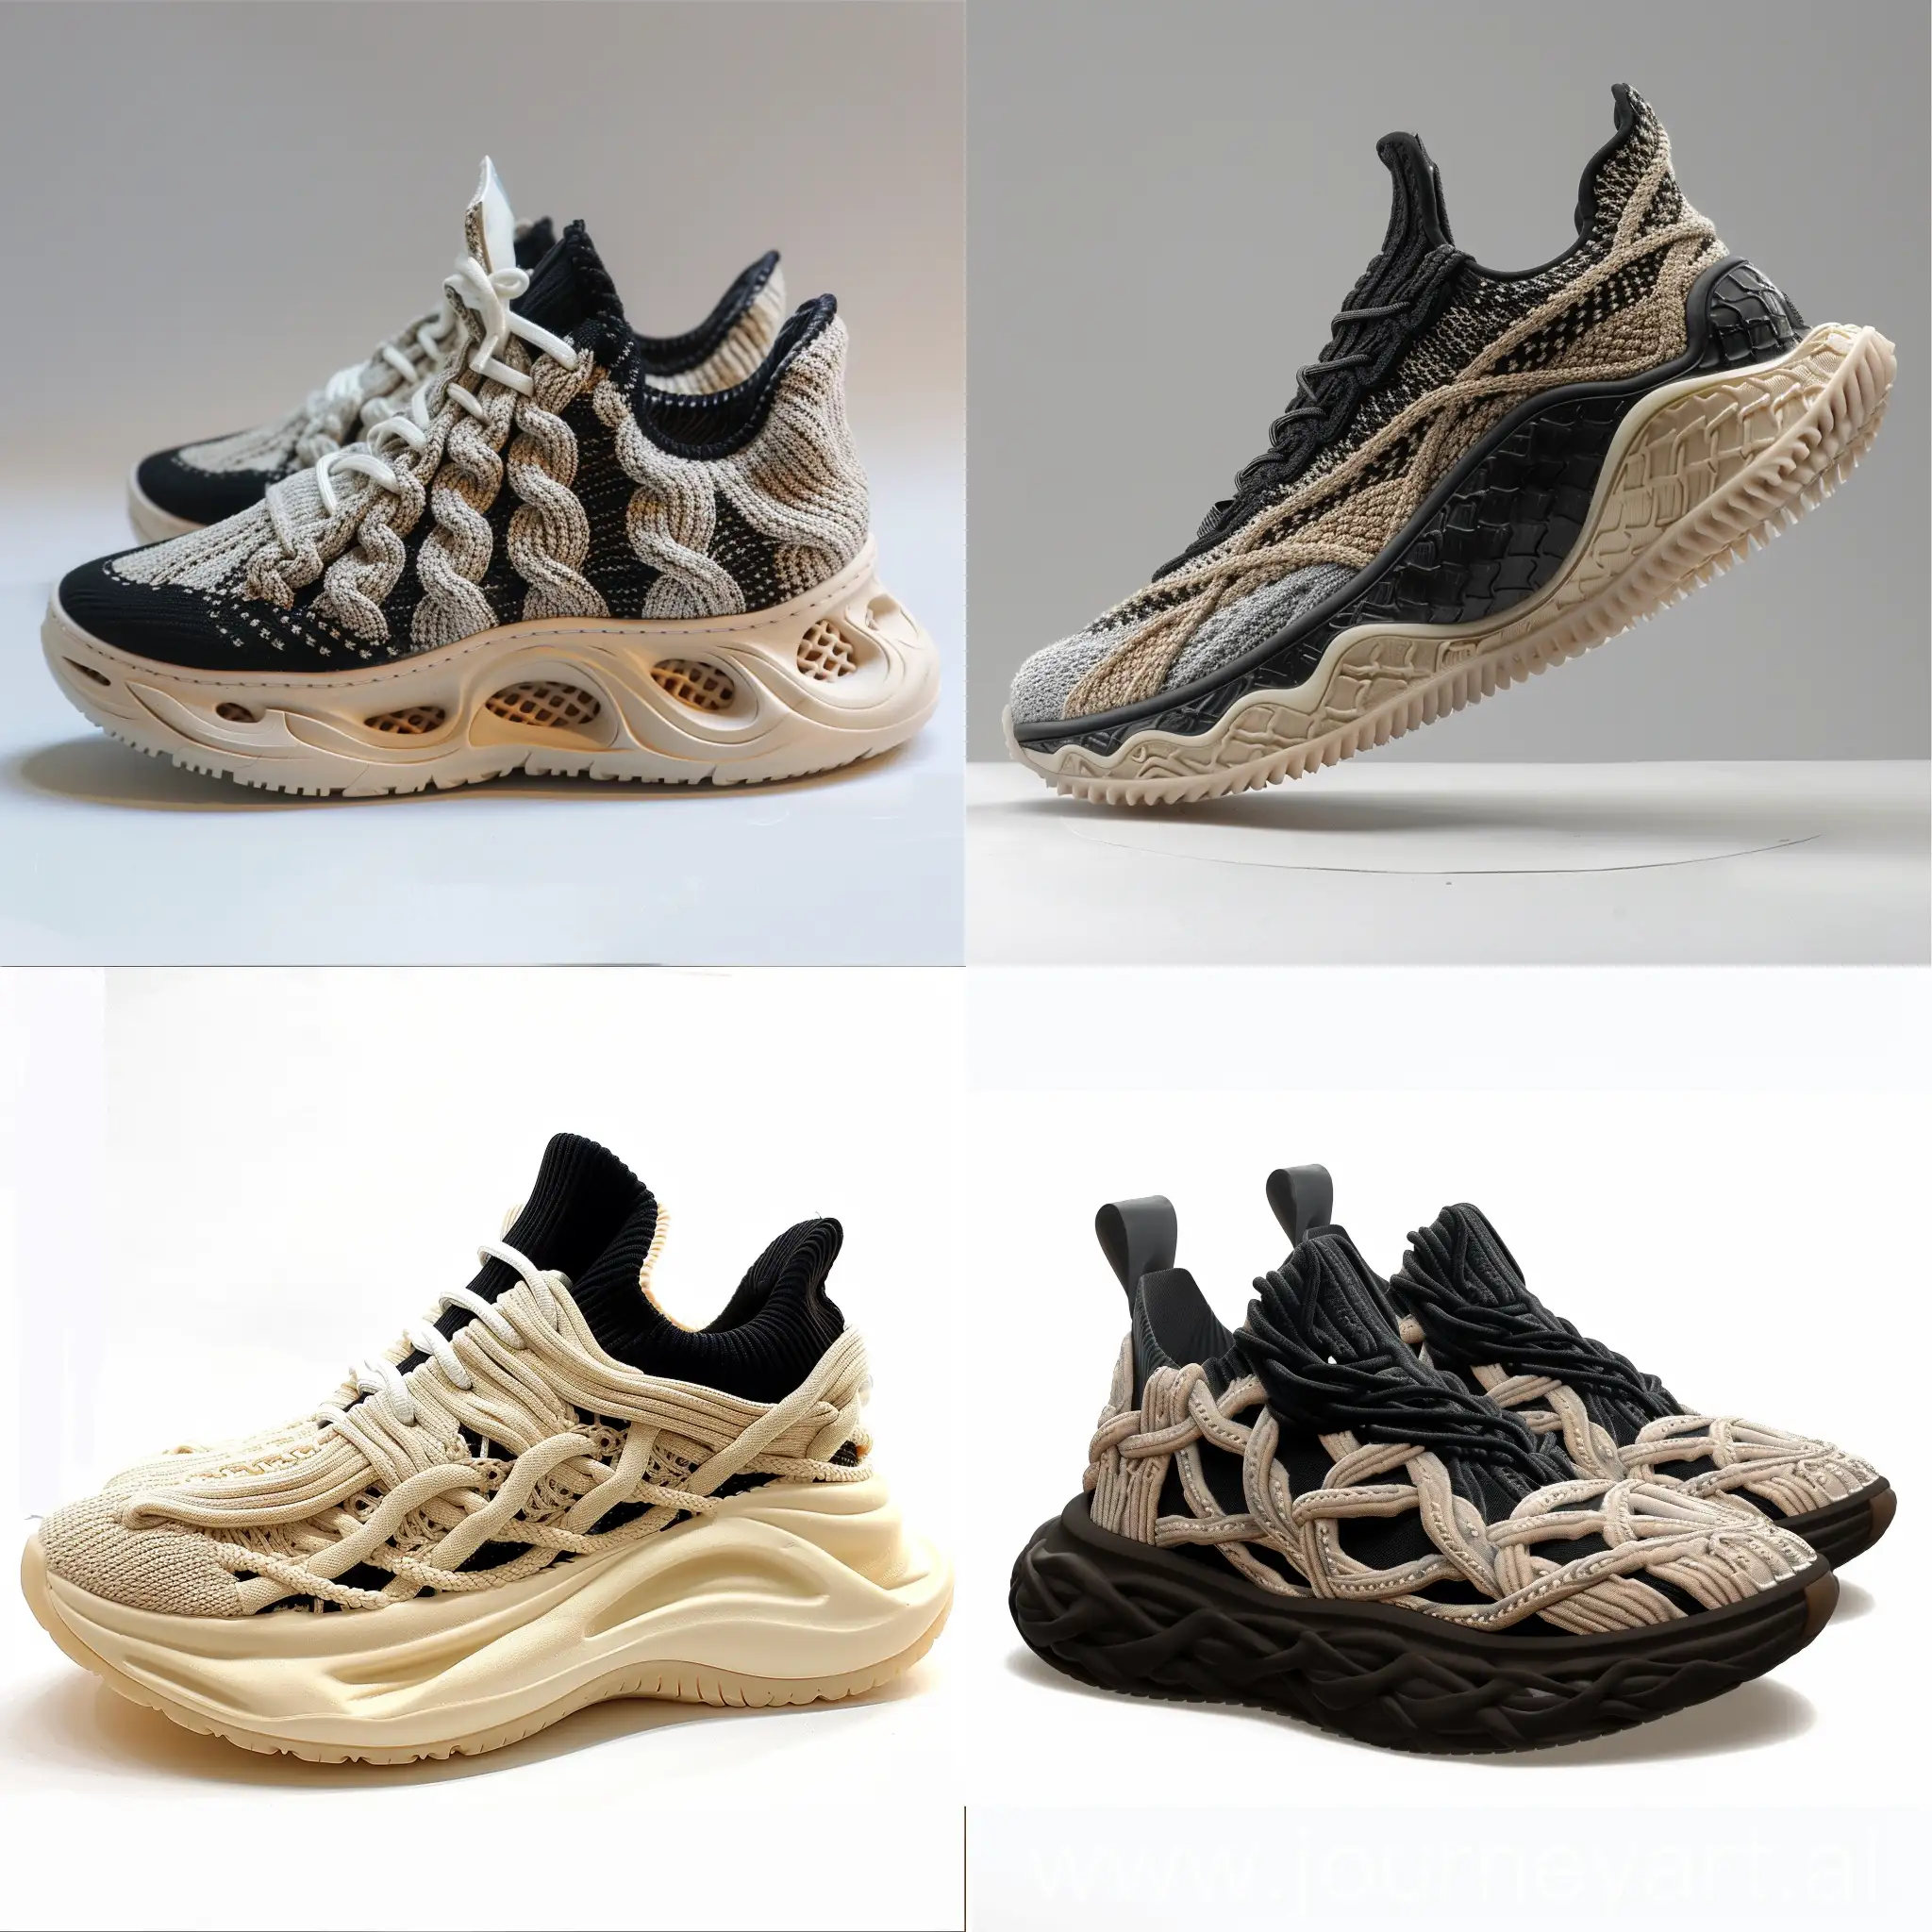 Sneakers design inspired by knitted cables fabric , Alexander McQueen shape , color black/light begie , cables knitted rubber midsole , hiphop , skating  , low neck